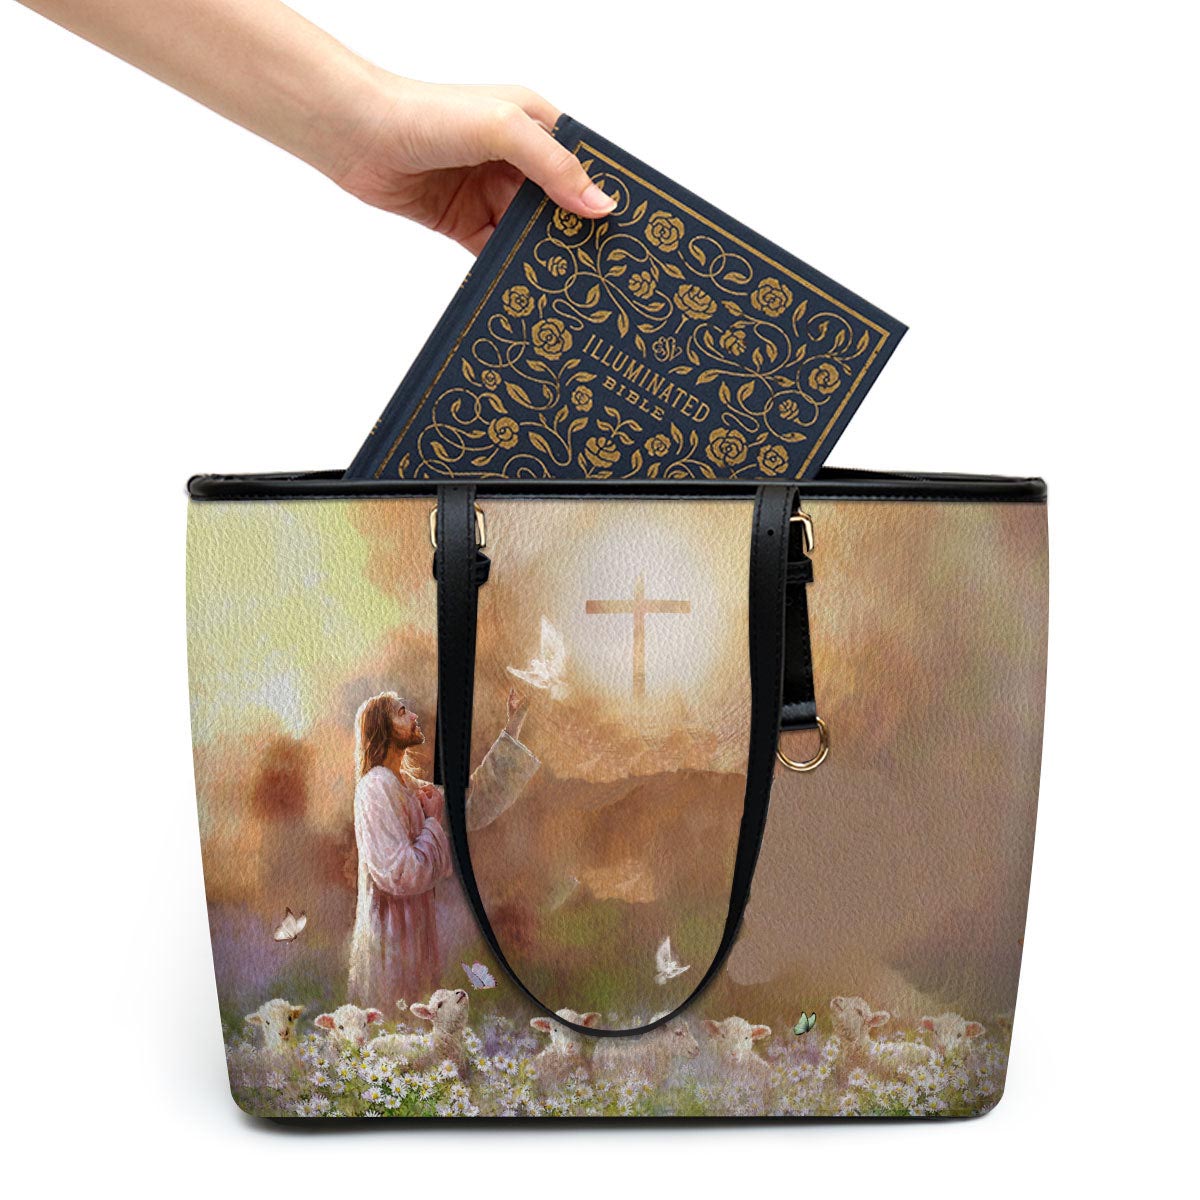 Nature Is The Lord‘s Artwork Large Pu Leather Tote Bag For Women - Mom Gifts For Mothers Day